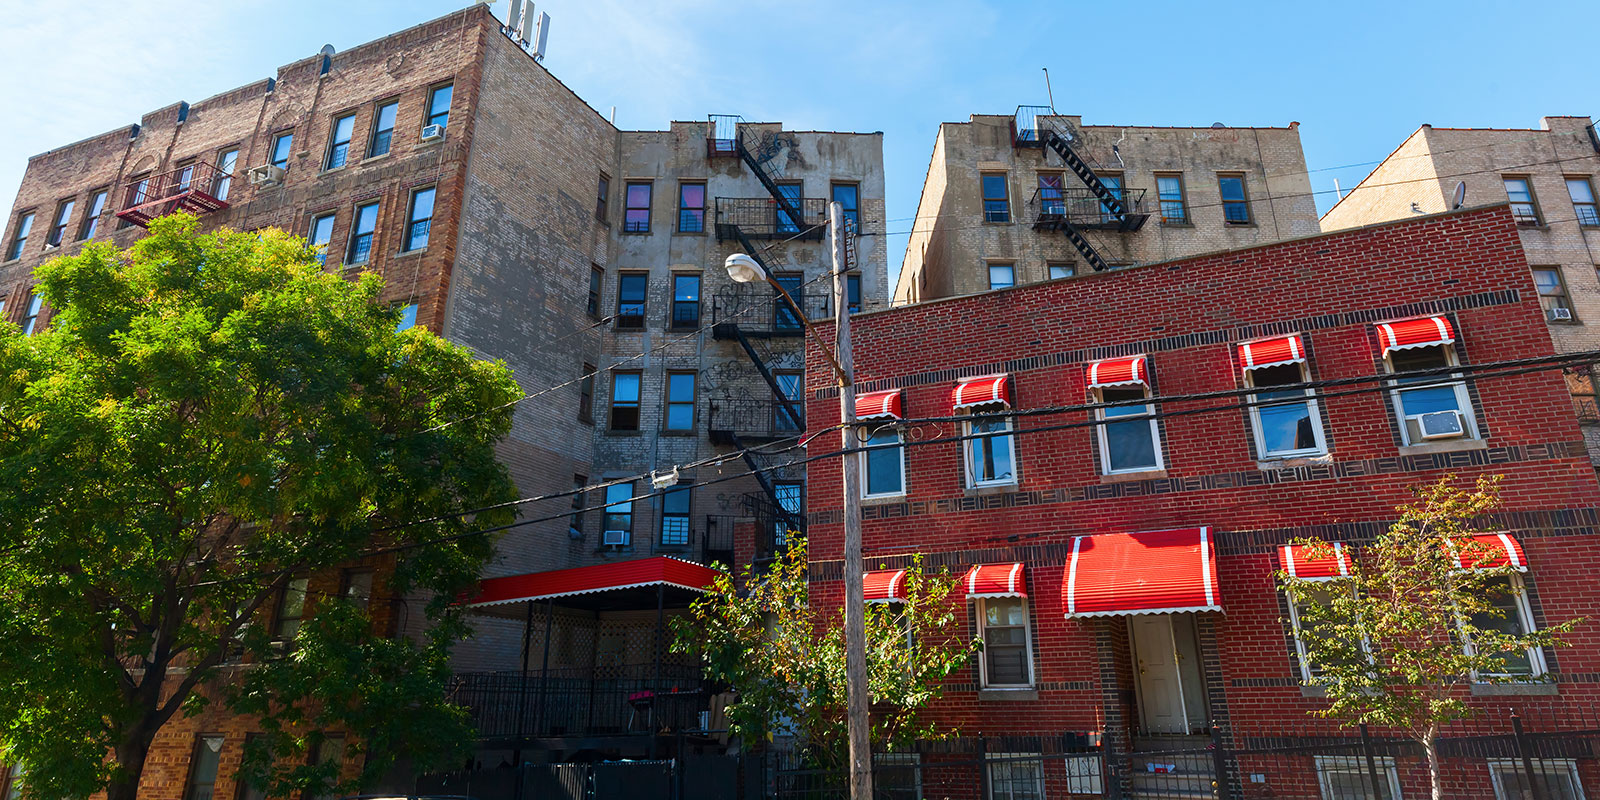 Residences in Hunts Point, The Bronx (Madrabothair/Dreamstime)